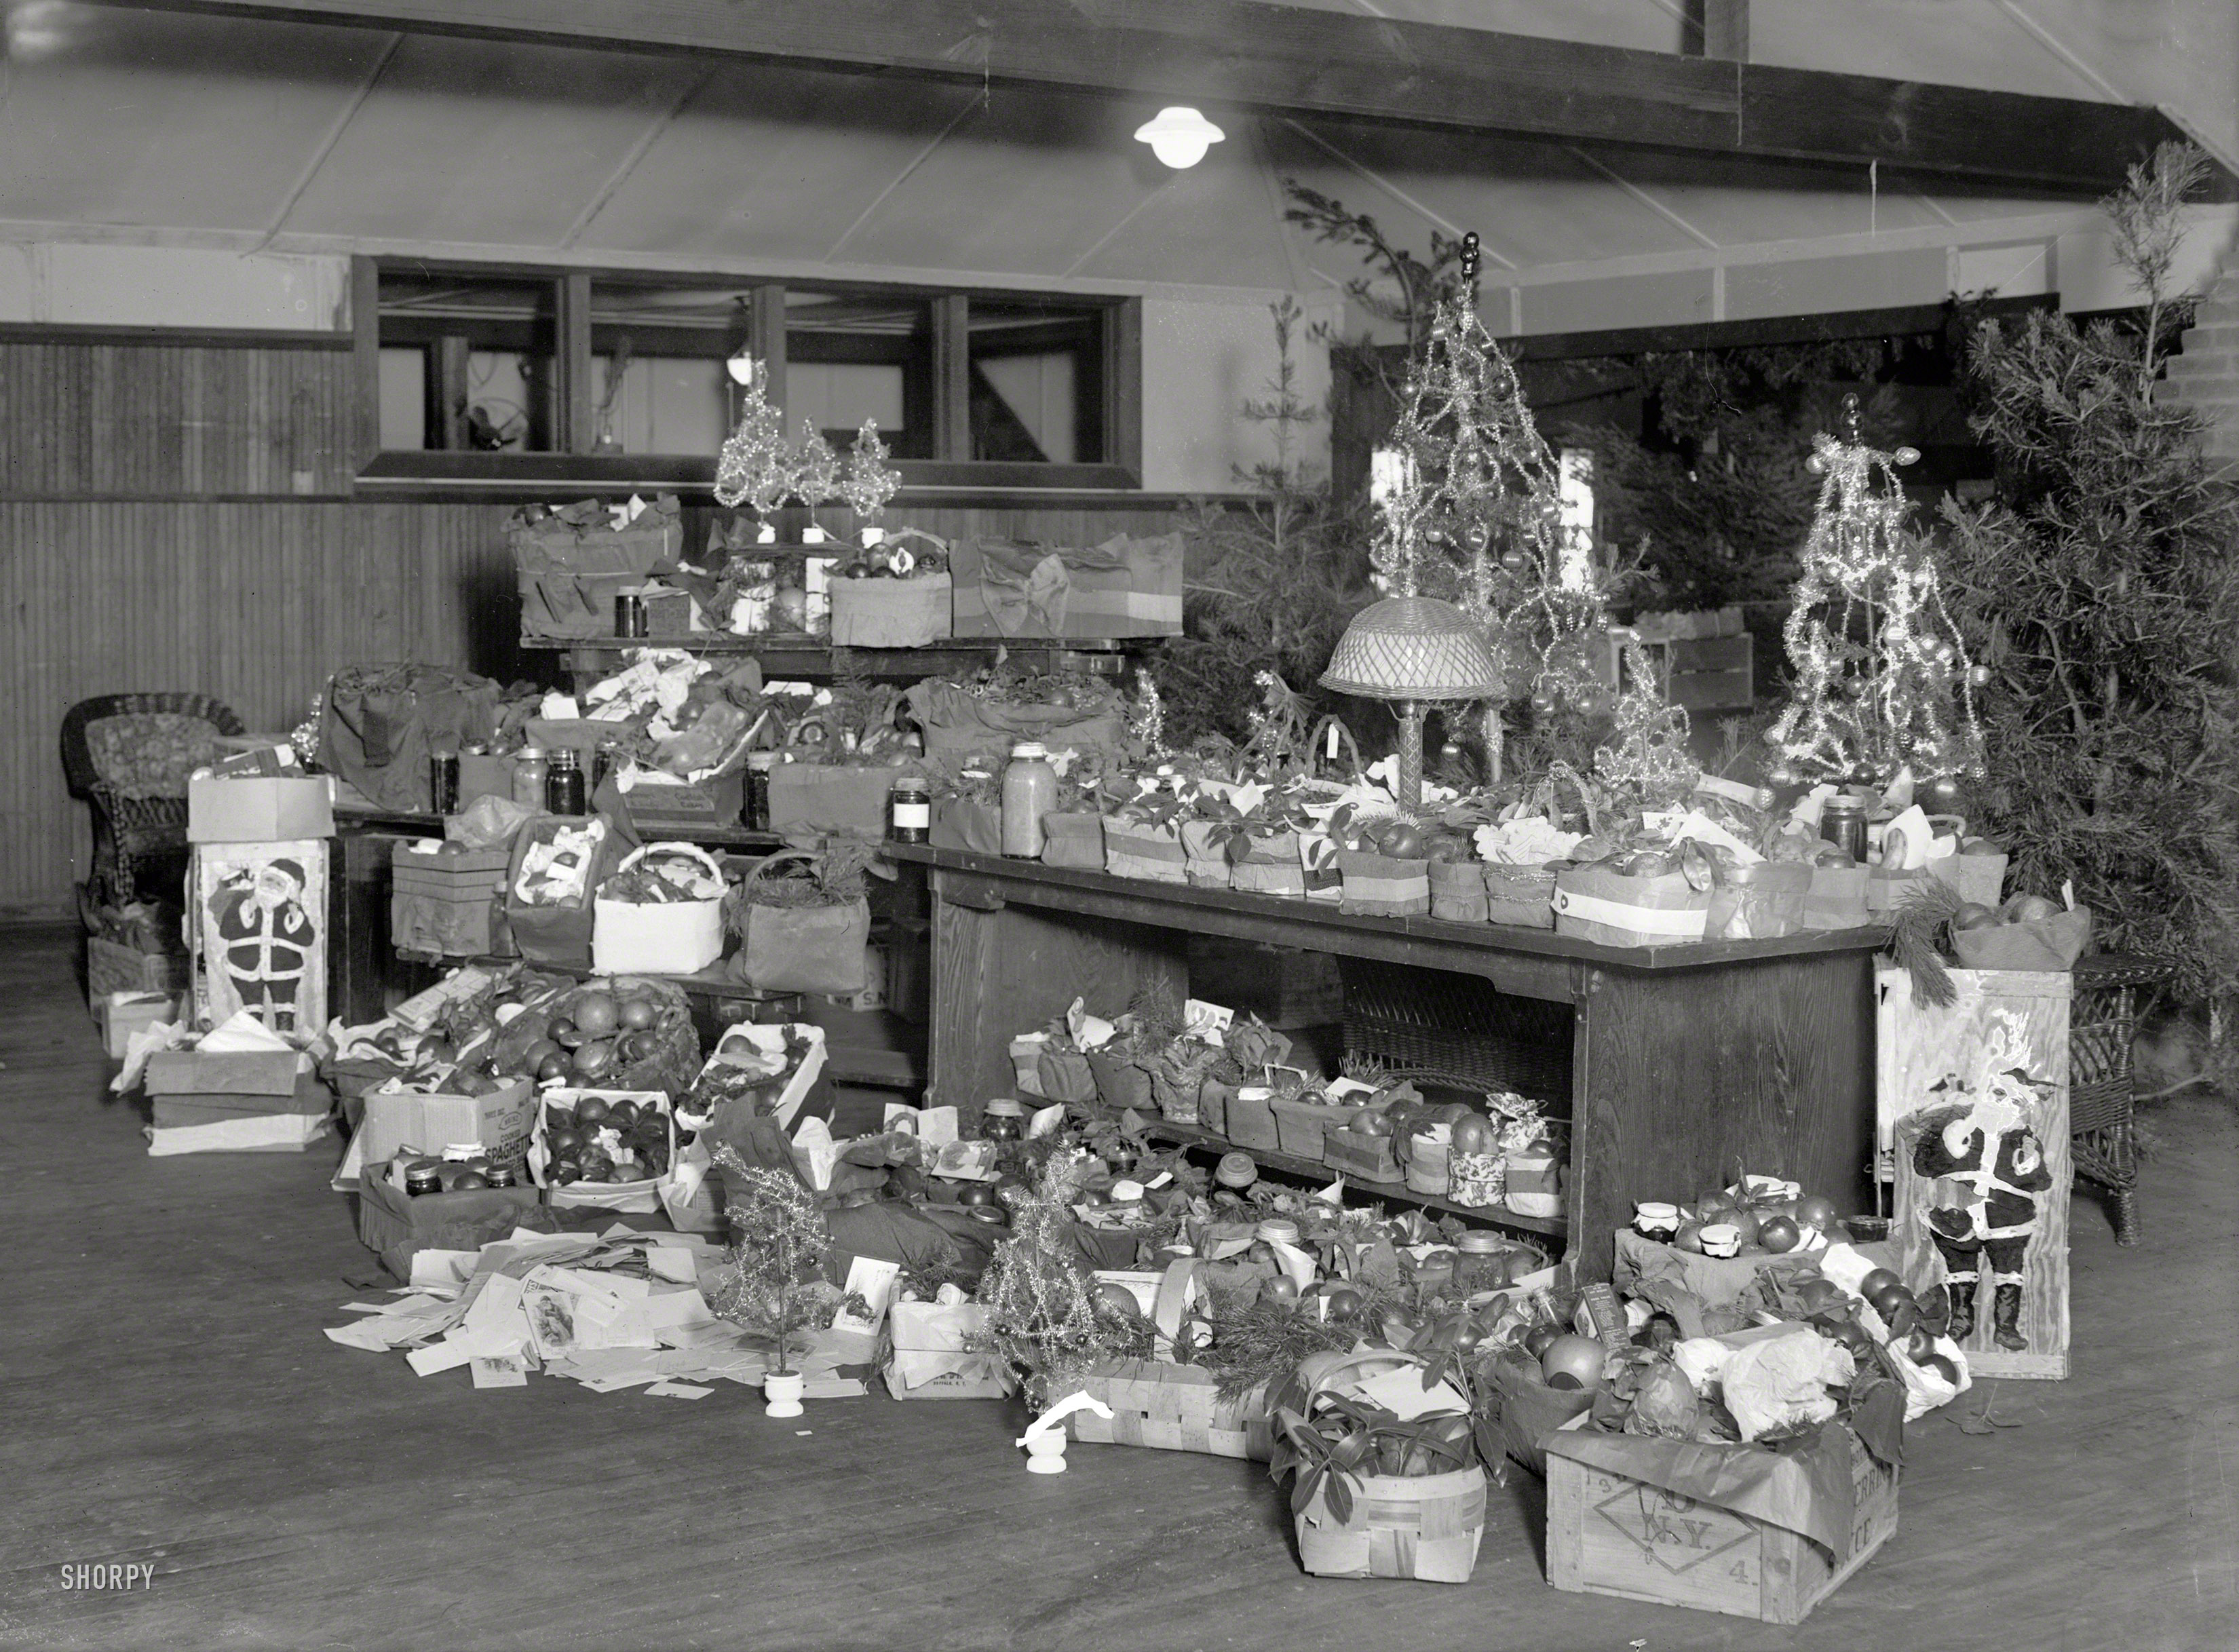 Washington, D.C. "Red Cross baskets, Walter Reed Hospital, Christmas 1920." National Photo Company Collection glass negative. View full size.